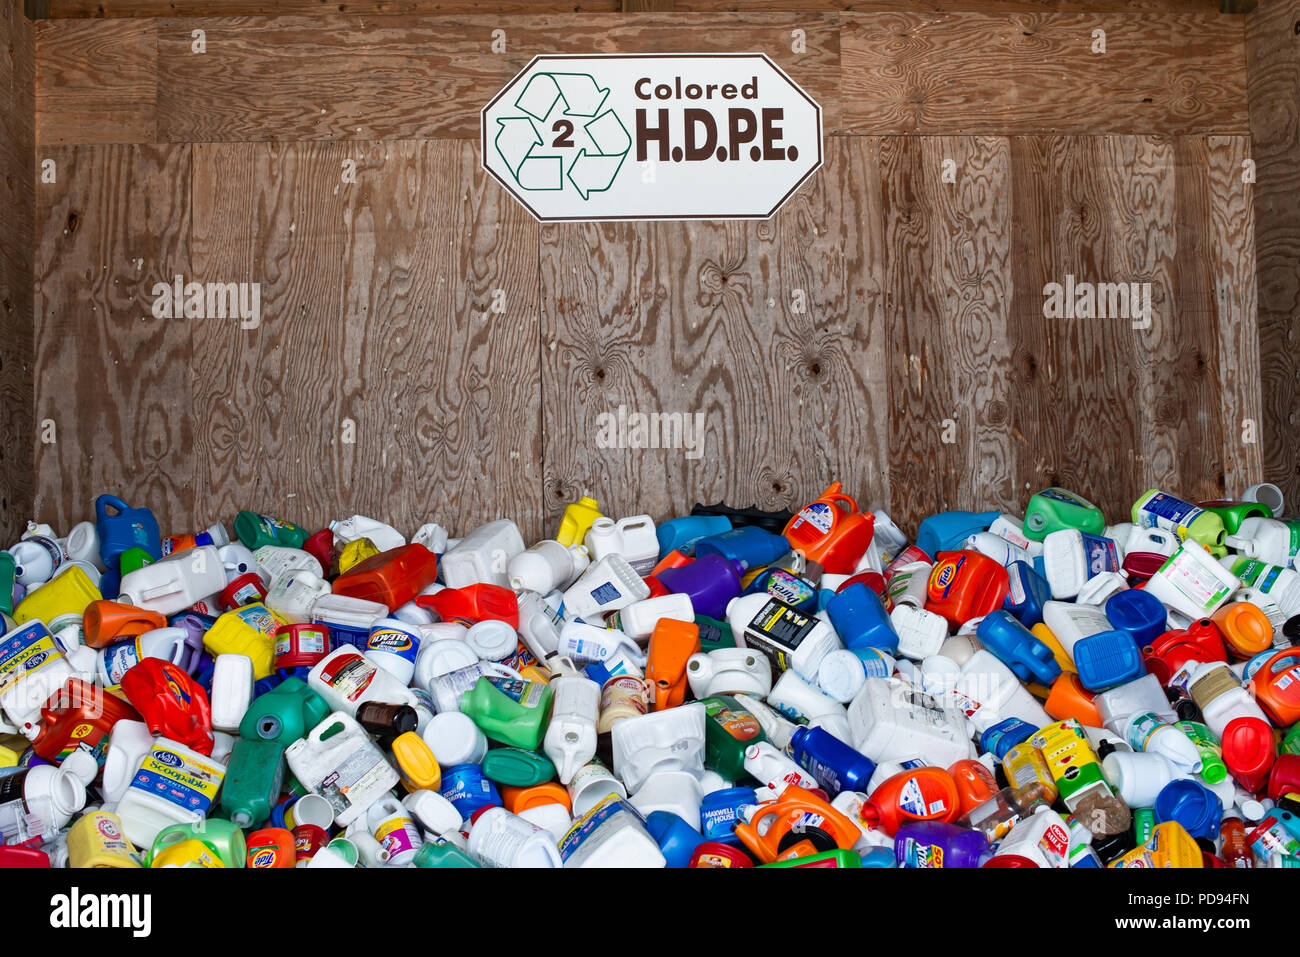 A bin full of colored dirty high-density polyethylene , HDPE, plastic containers at a Hamilton County recycling center in Lake Pleasant, NY USA Stock Photo